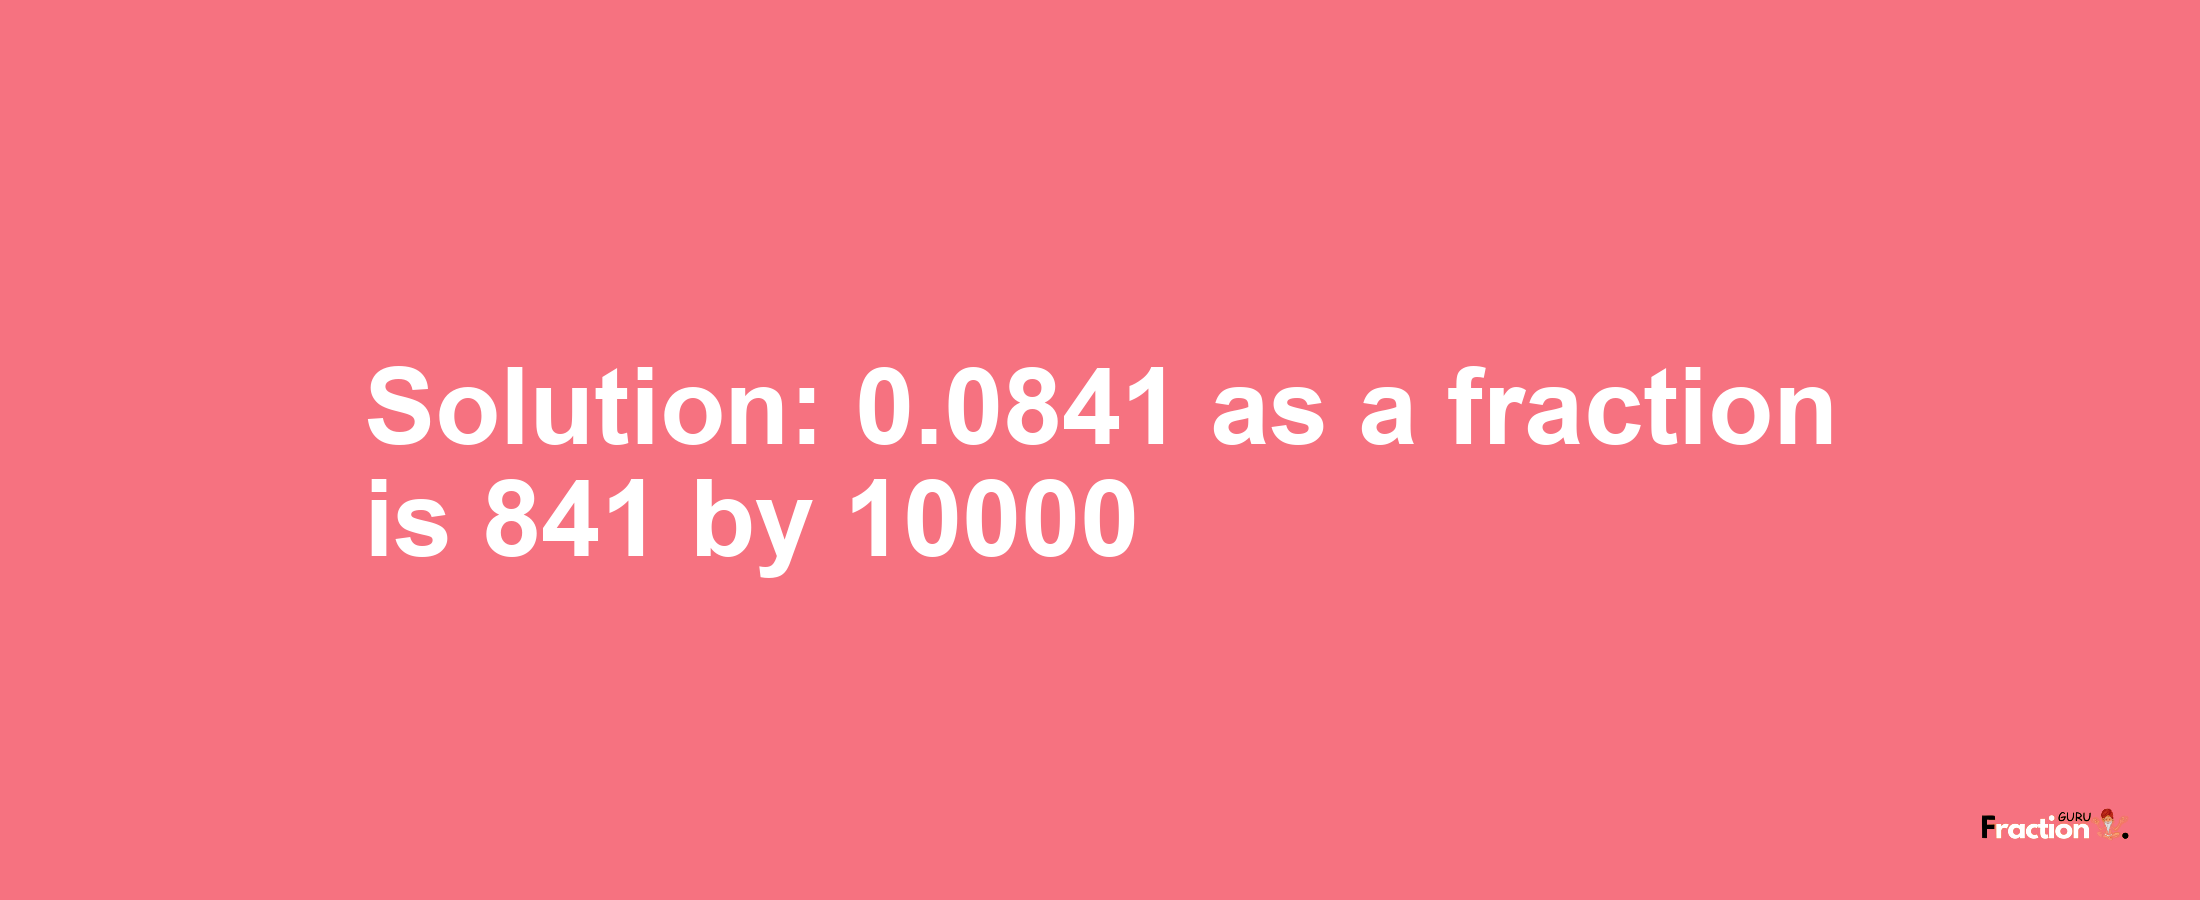 Solution:0.0841 as a fraction is 841/10000